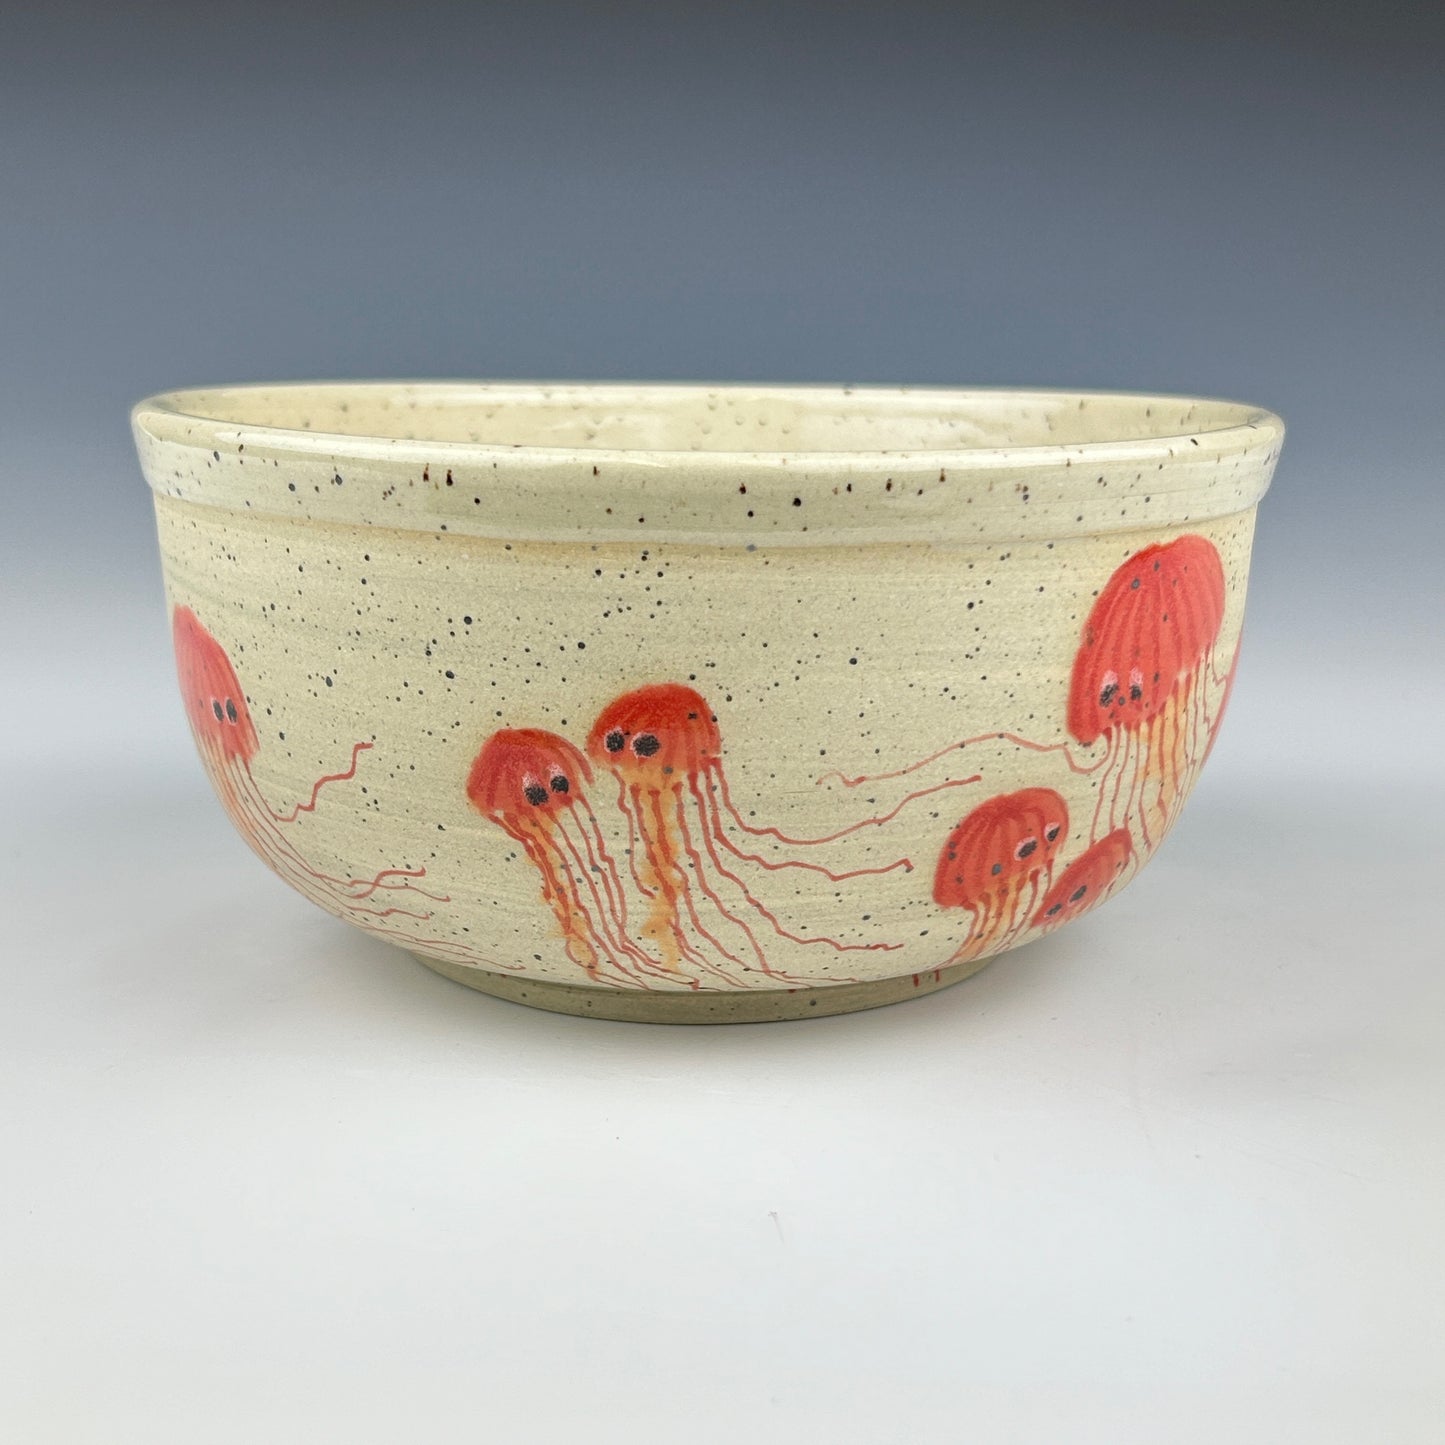 Margery Rose - Speckled Sea Nettle bowl  #6